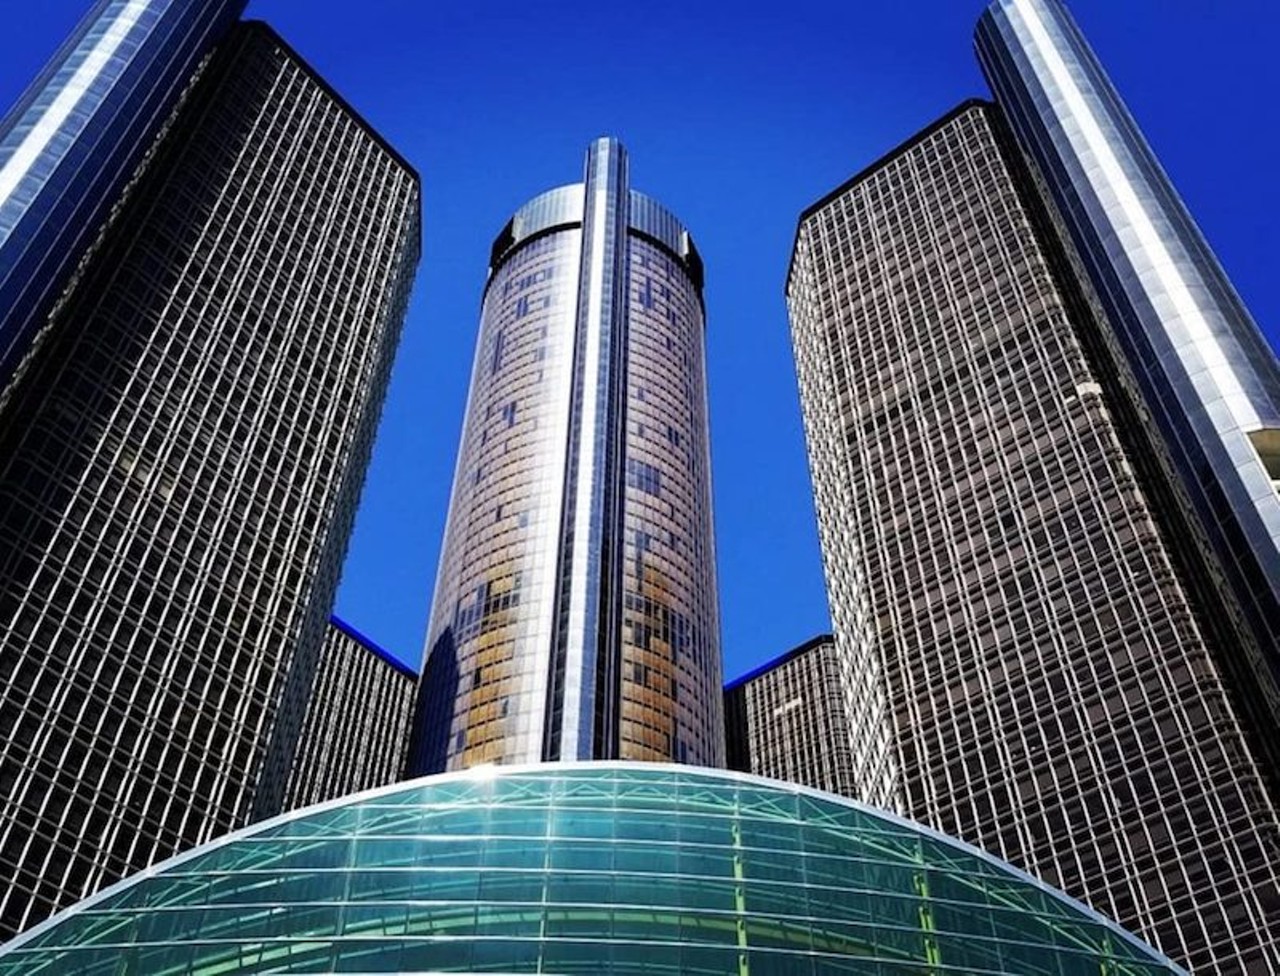 GM Renaissance Center
gmrencen.com
Visit Michigan's tallest building! With over 44,000 square feet, there&#146;s so much to see. Bring your fancy professional camera to take snapshots of the skyline outside and the modernist architecture inside; or make your visit into a dream Instagram story by getting a hotel room with friends, champagne, and a polaroid camera. 
Photo via Detroit Marriott at the Renaissance Center / Facebook